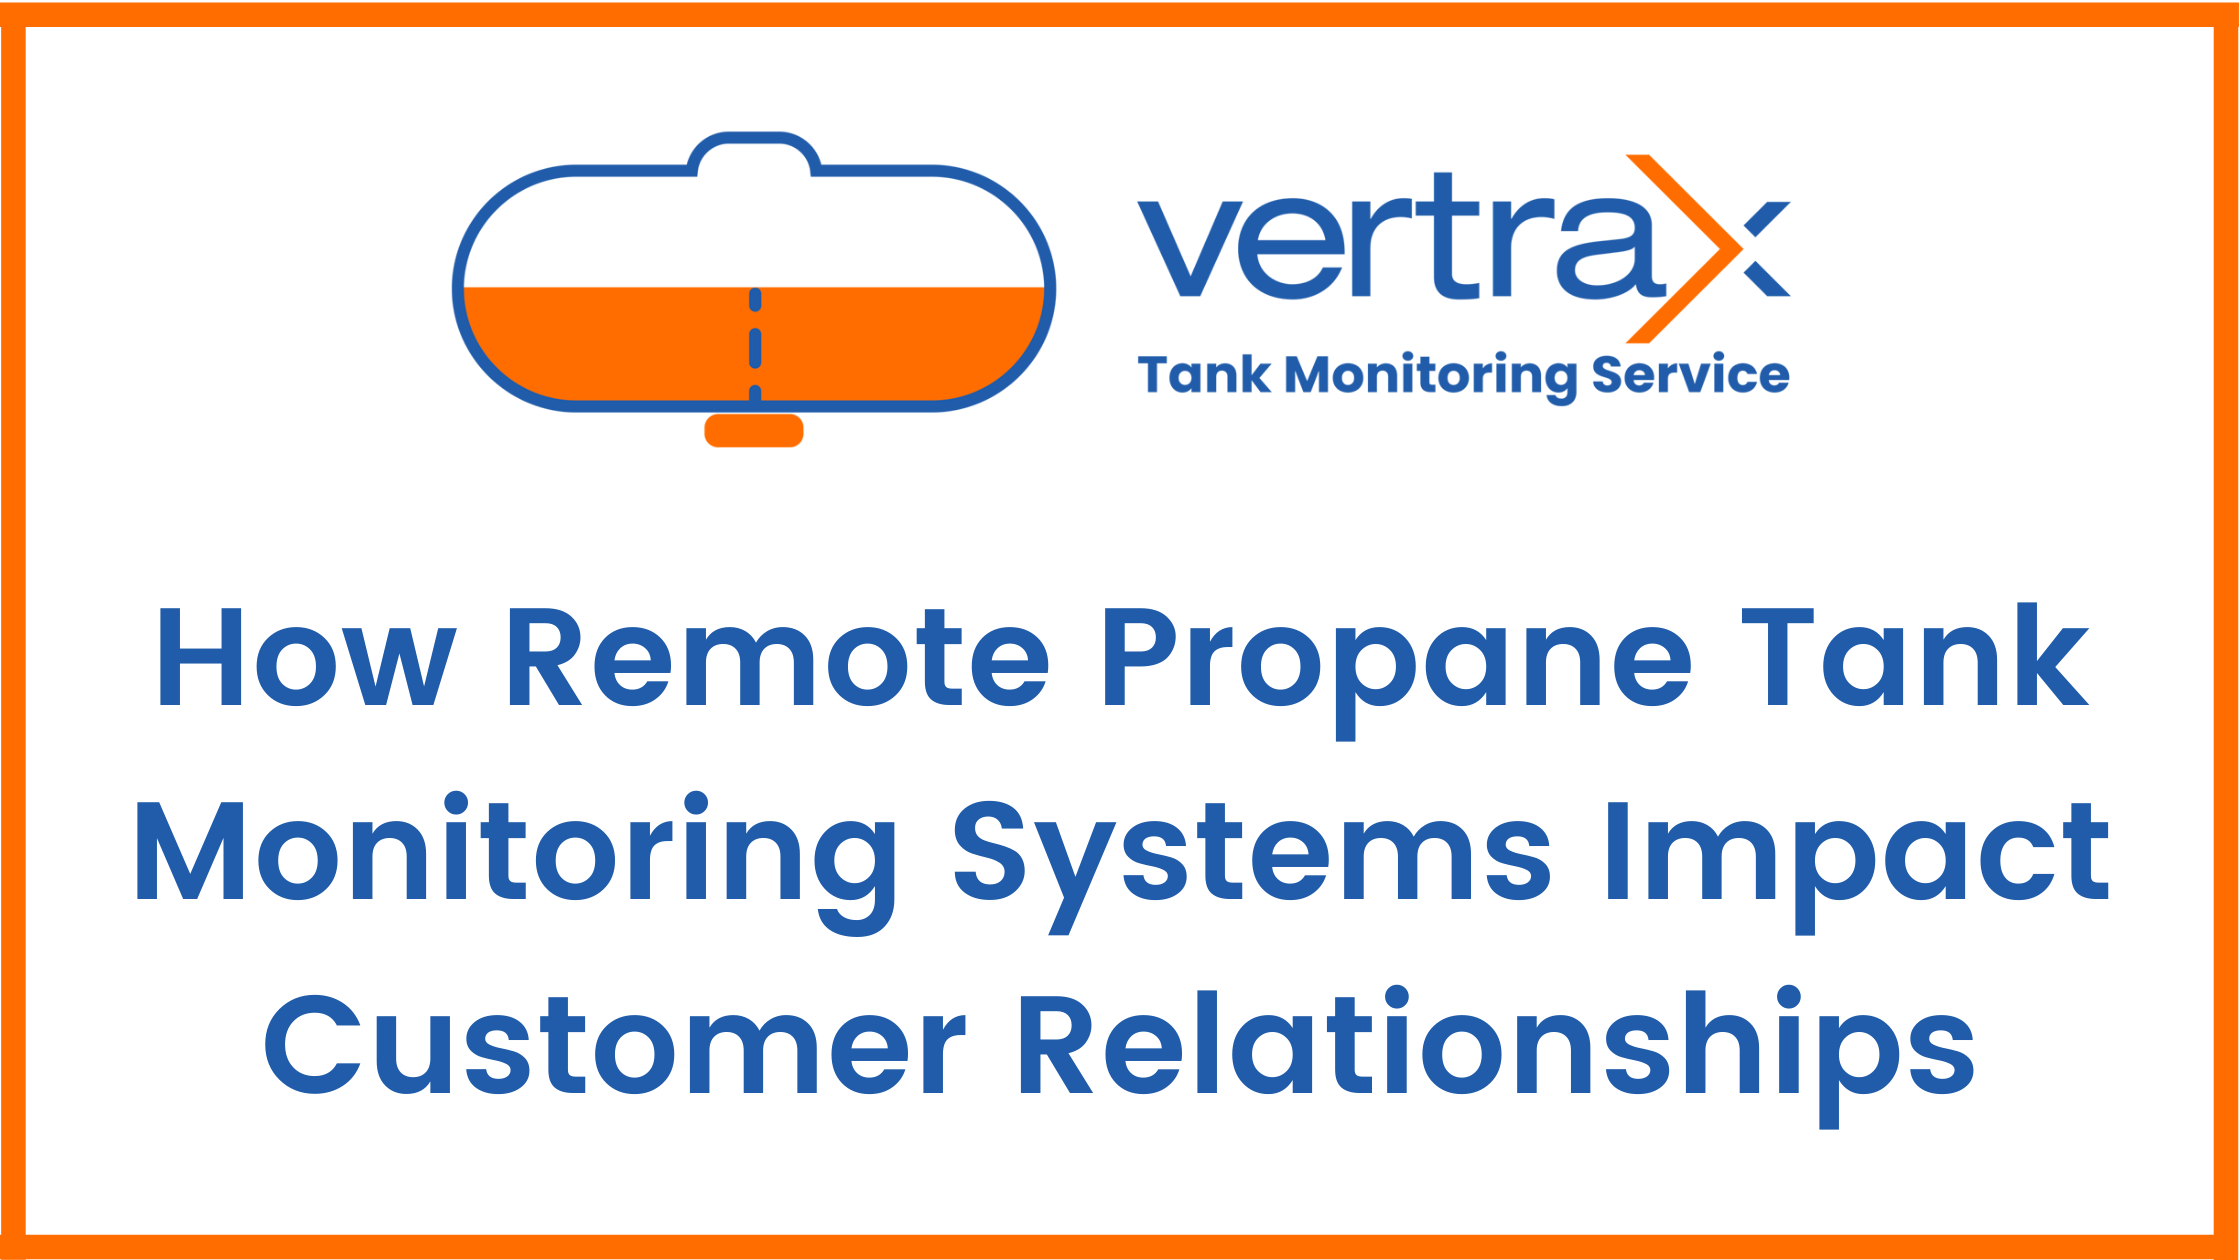 How Remote Propane Tank Monitoring Systems Impact Customer Relationships